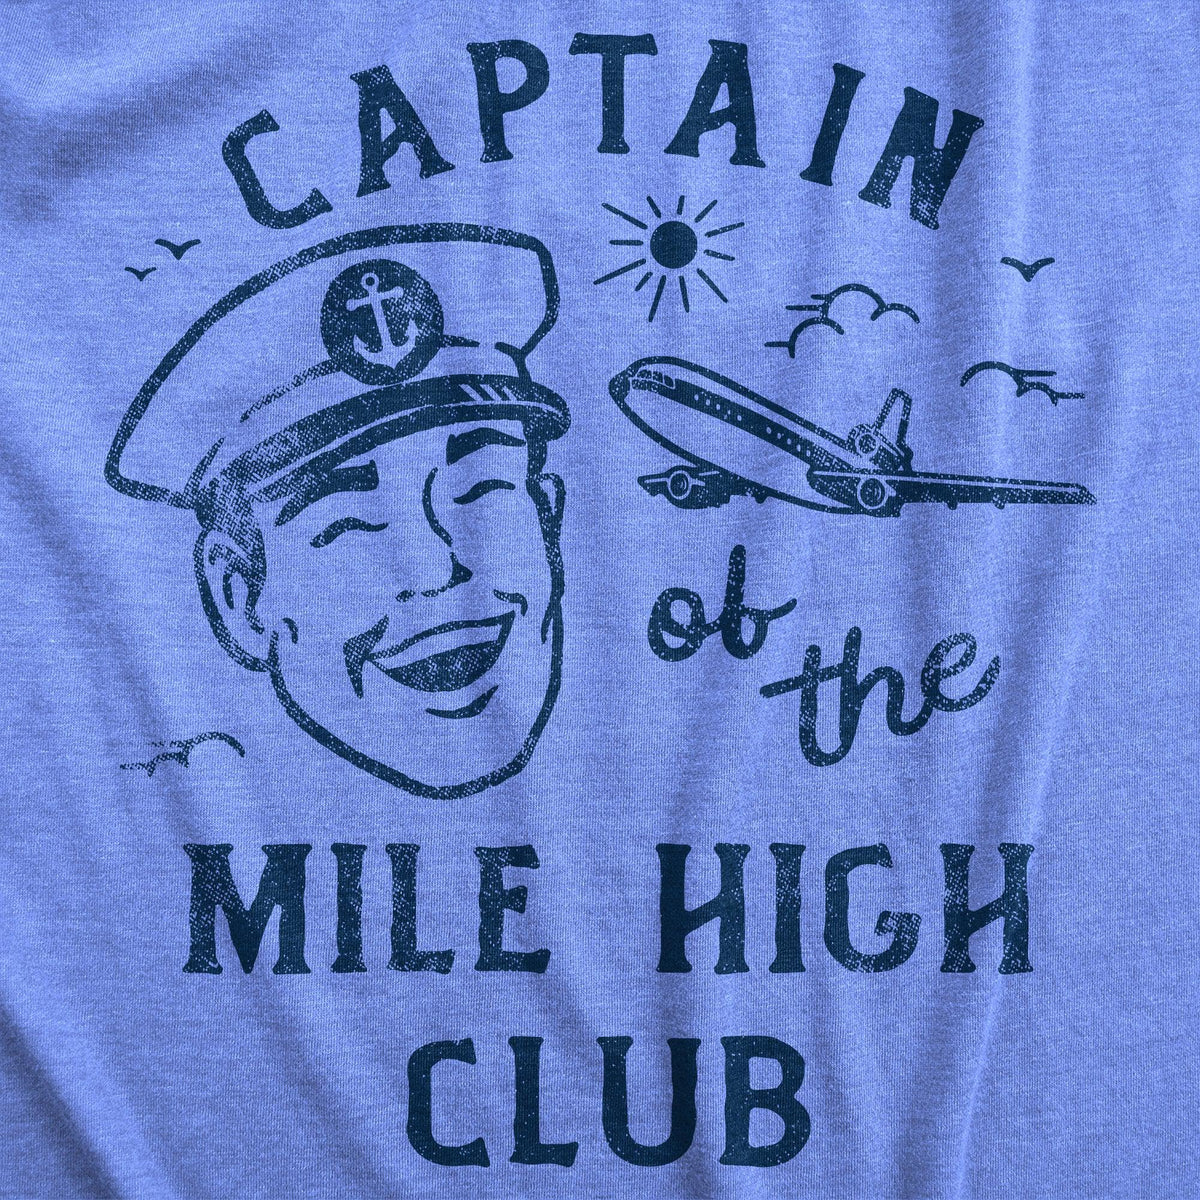 Captain Of The Mile High Club Men&#39;s Tshirt  -  Crazy Dog T-Shirts